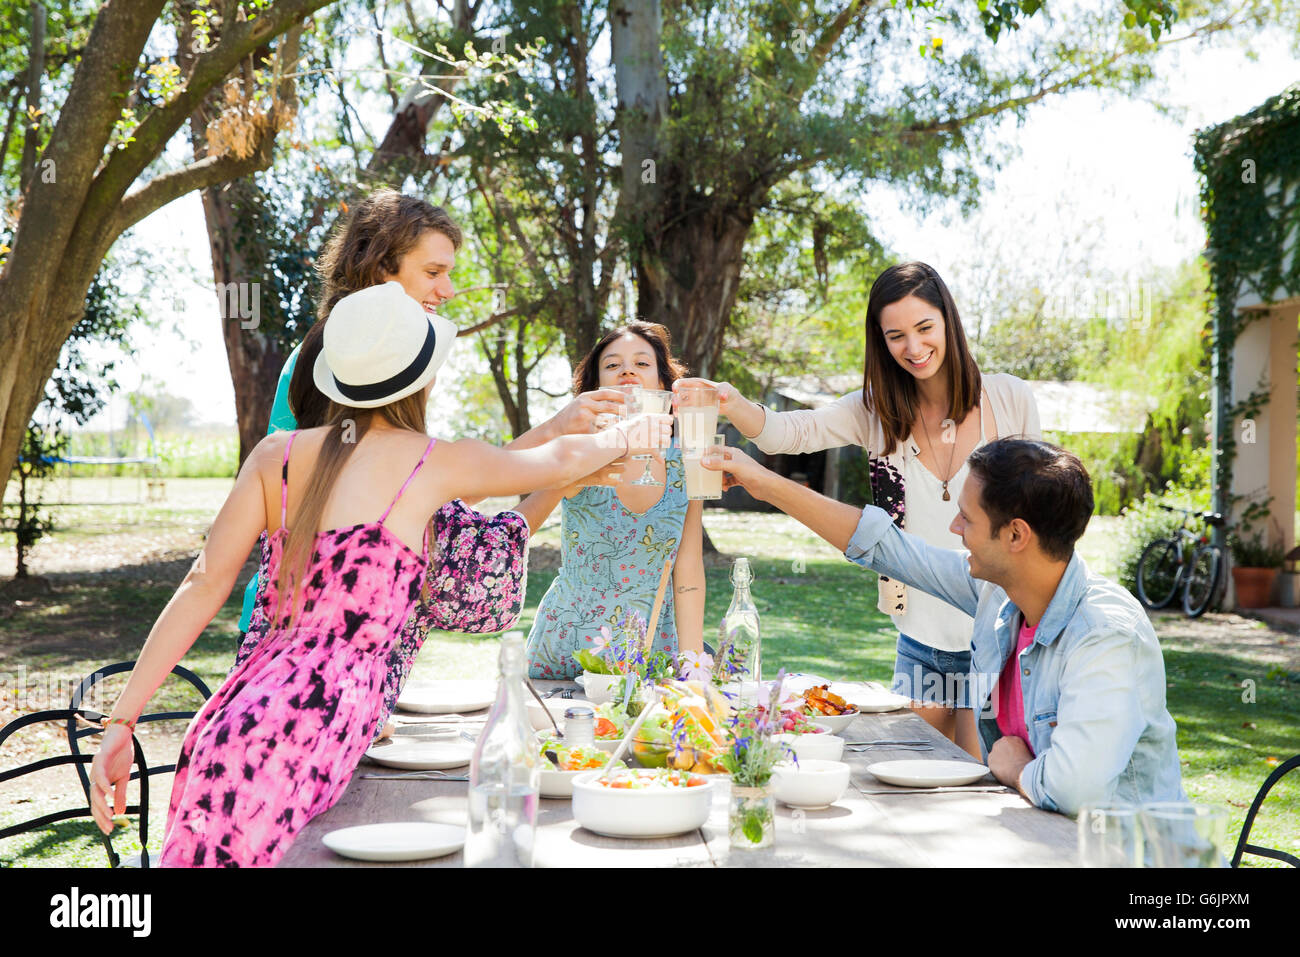 Friends celebrating together with meal outdoors Stock Photo